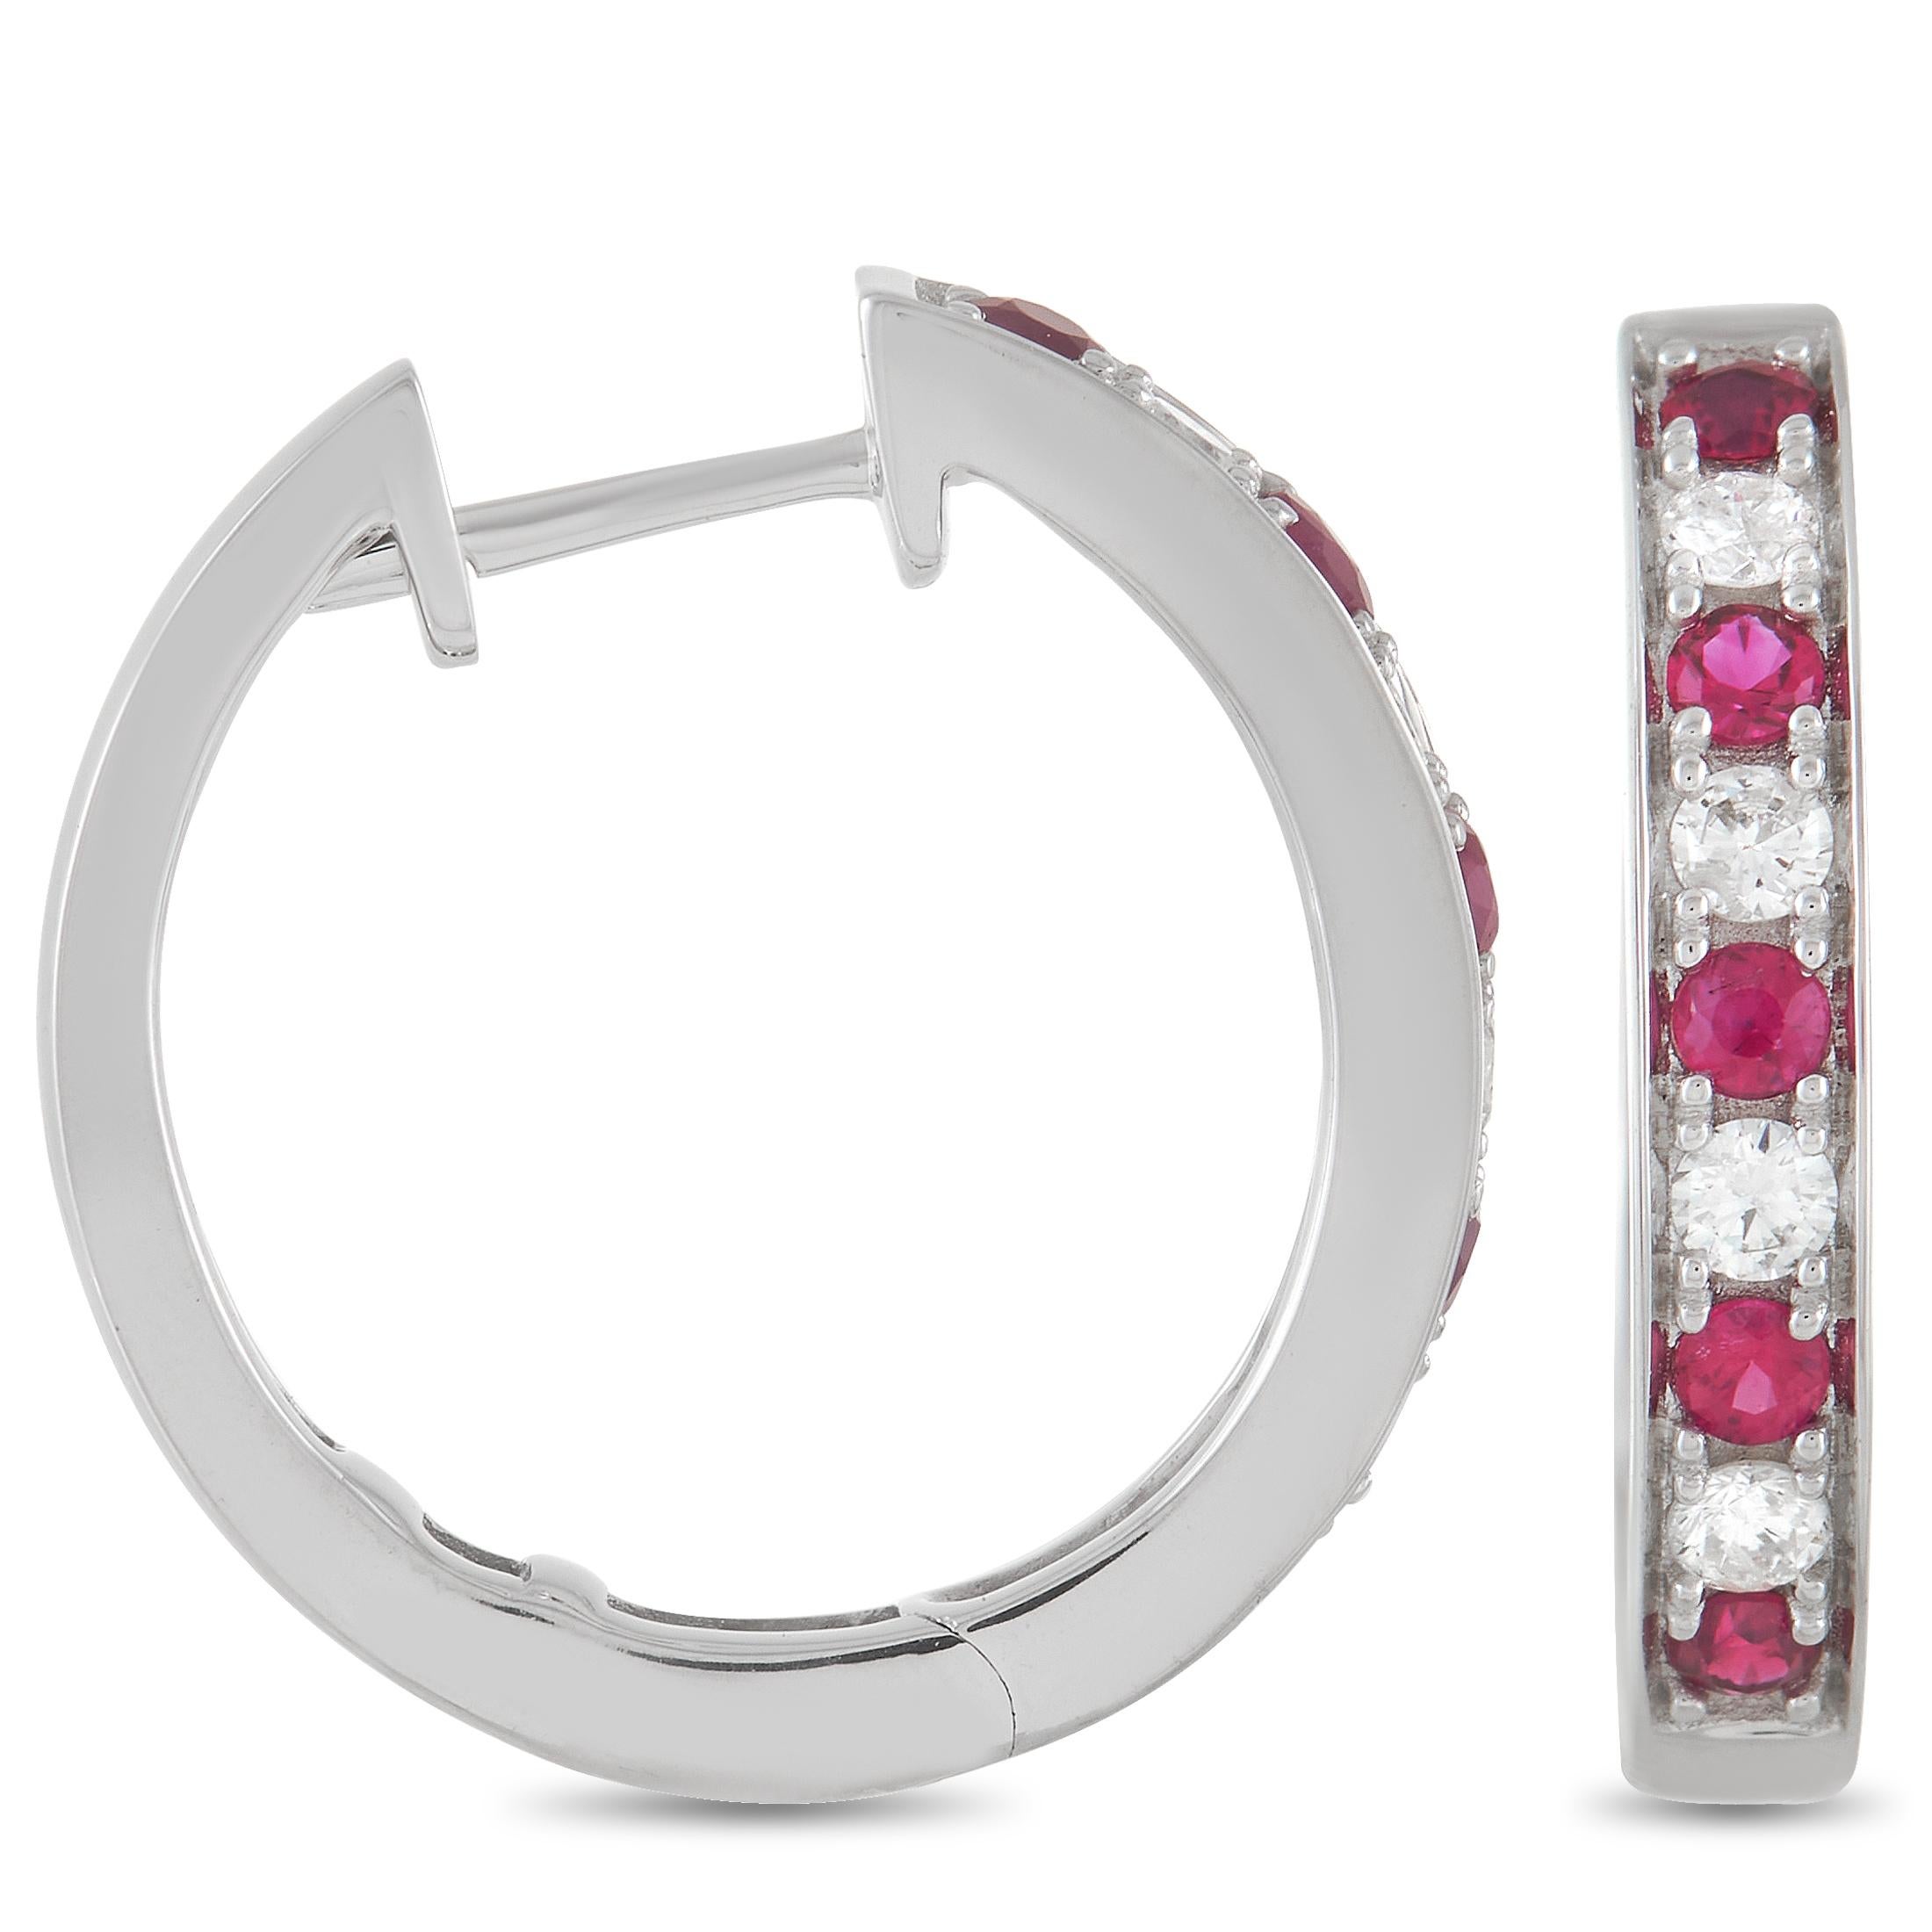 These lovely LB Exclusive 14K White Gold 0.25 ct Diamond 0.42 ct Ruby Hoop Earrings are made with 14K white gold and are set with 0.25 carats of round-cut diamonds and 0.42 carats of round cut rubies set in a single row along the face of each hoop.